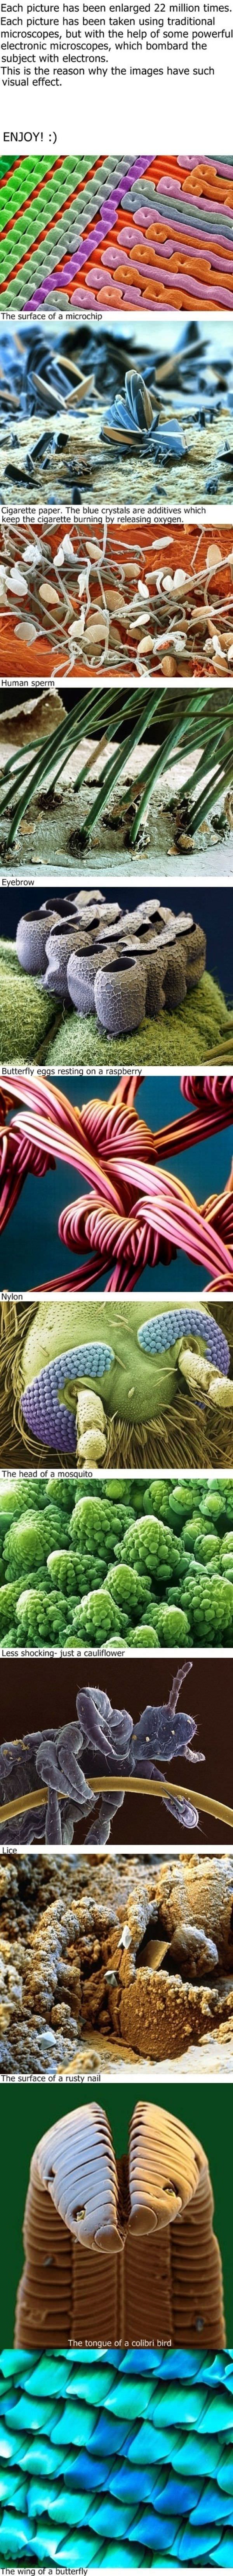 Cool_Microscope_Pictures.jpg